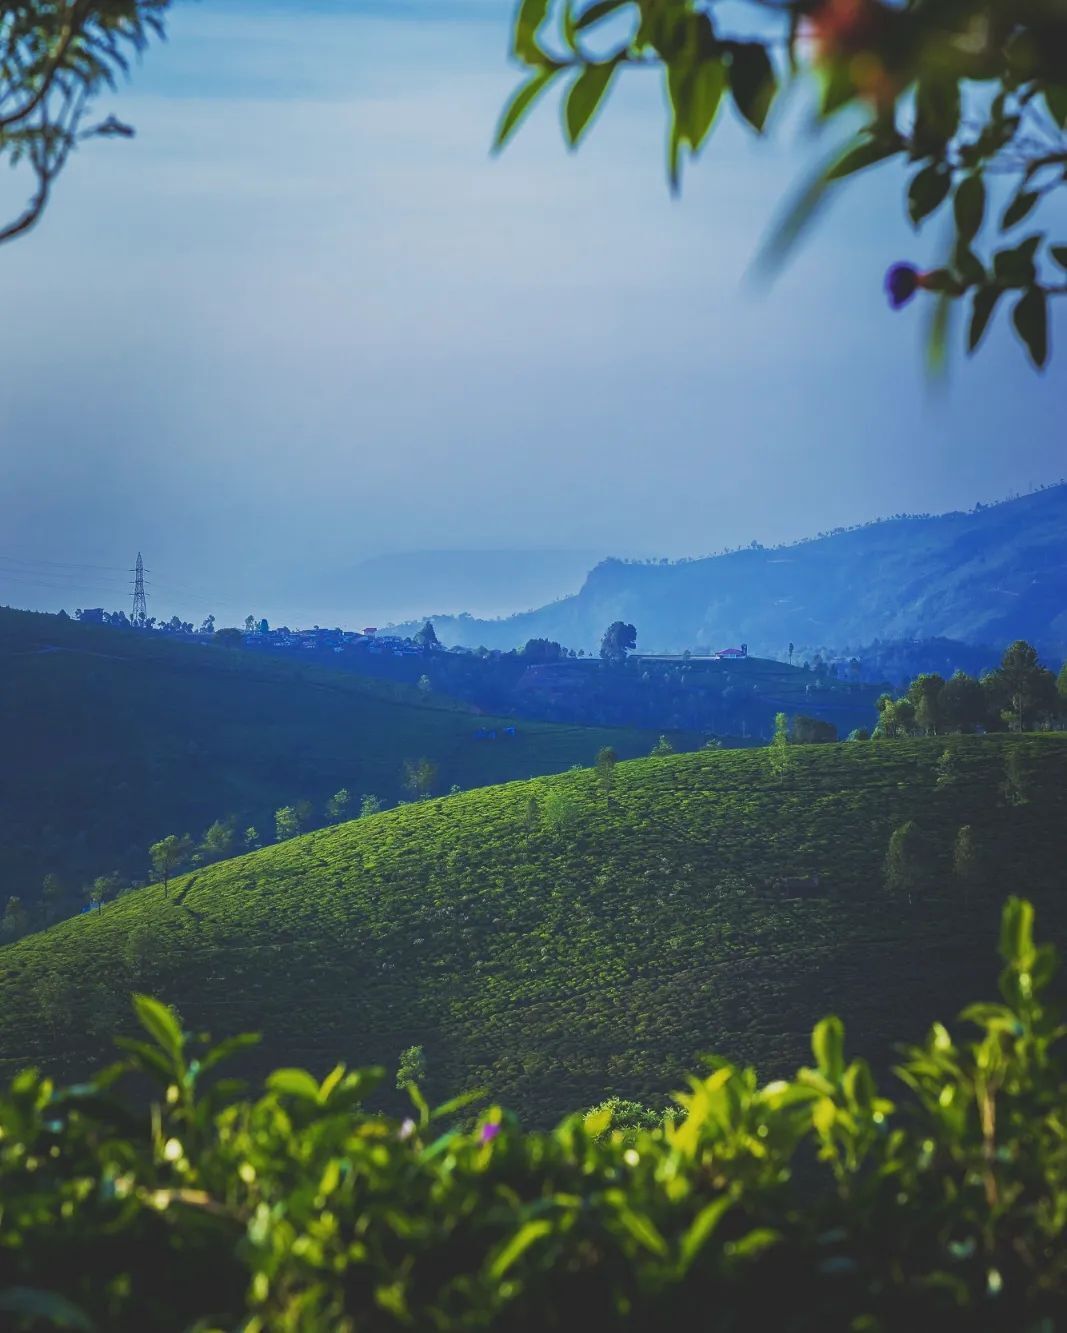 The trip from Bengaluru to Cherrapunjee is filled with views of the Nilgiri mountains